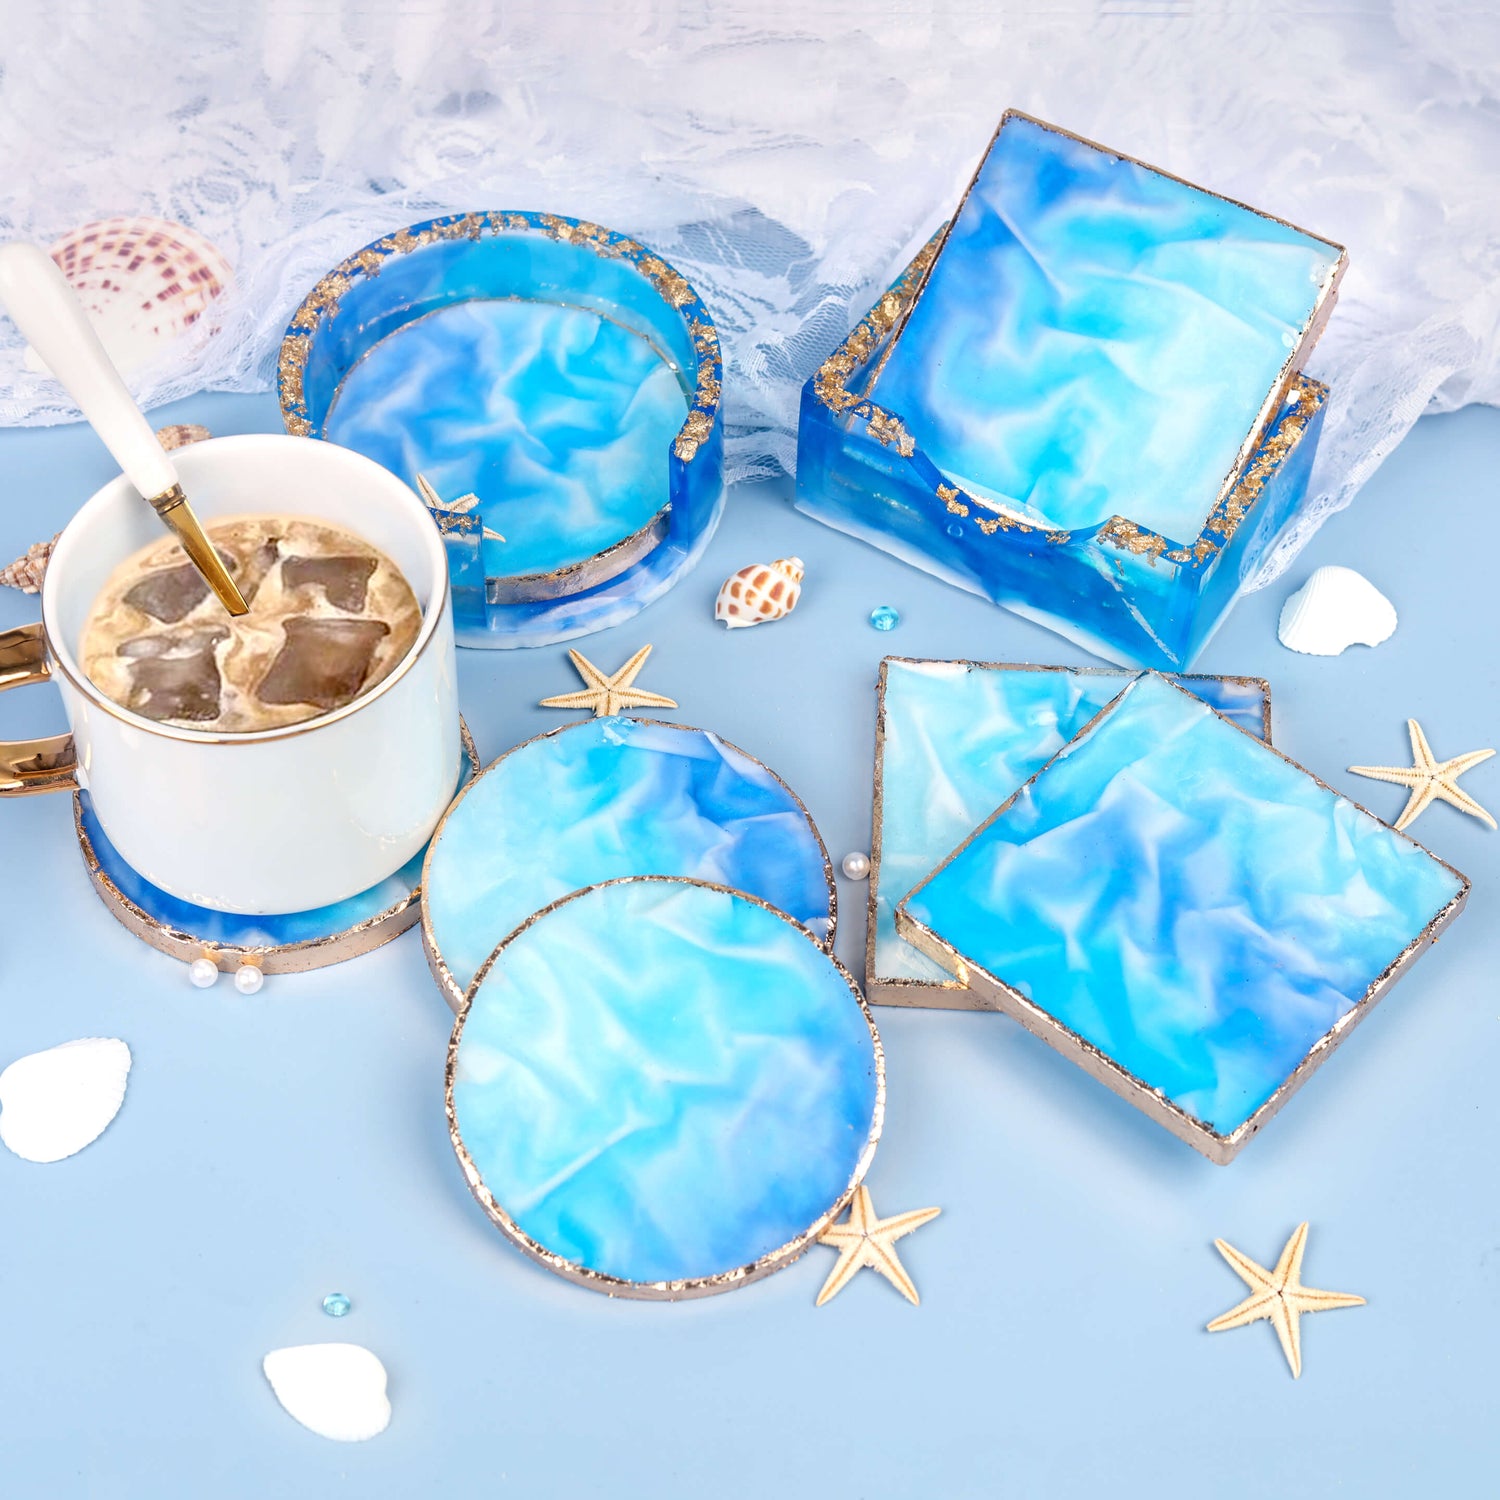 DIY Silicone Coaster Kit With Epoxy Resin And Geode Coasters Decorative  Resin Casting For Beginners Tray Mould For Crafts From Giftvinco13, $2.38